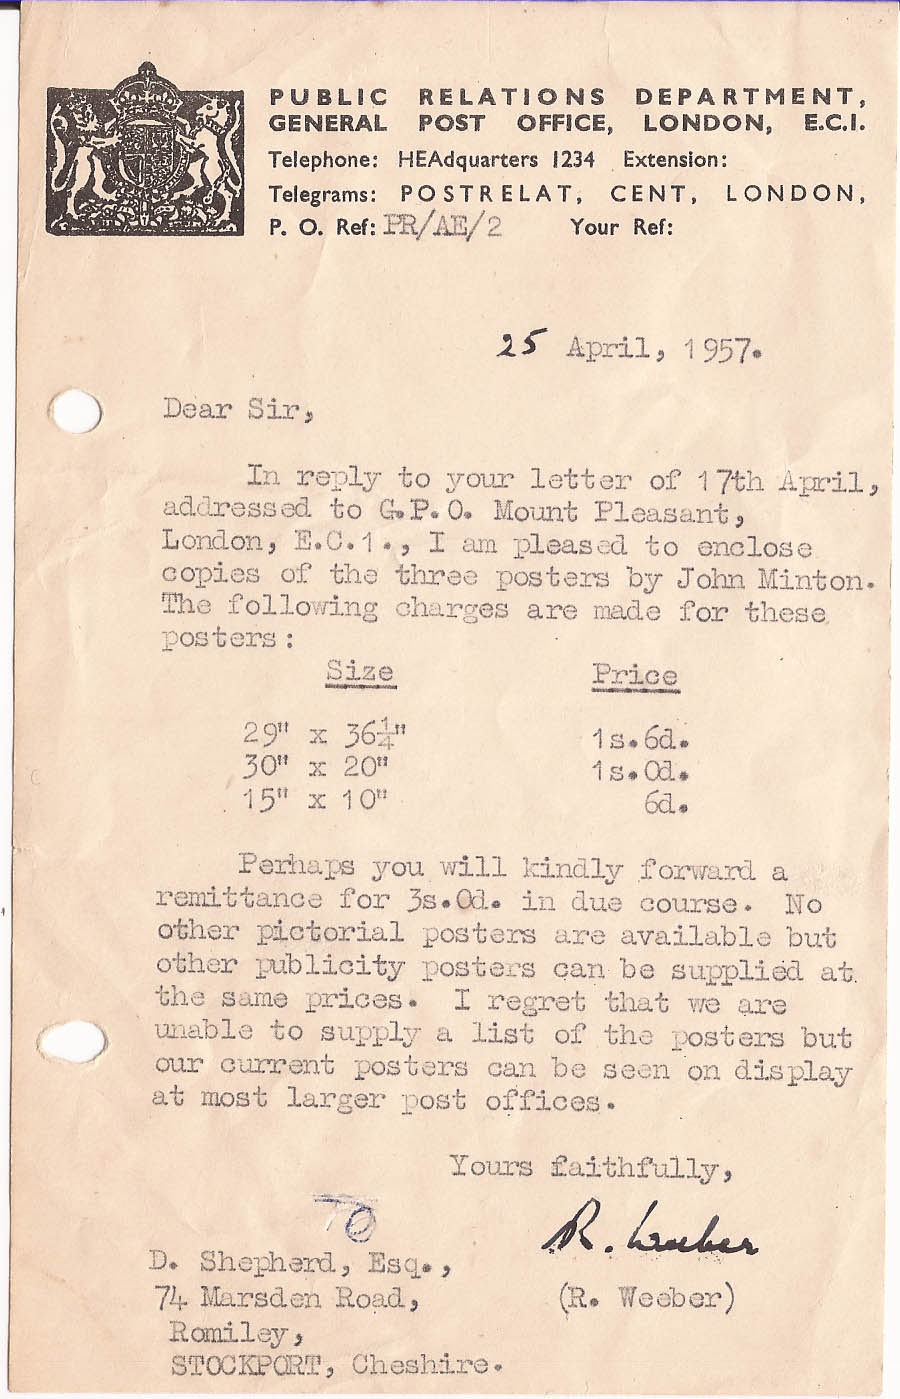 GPO letter about poster ordering 1957